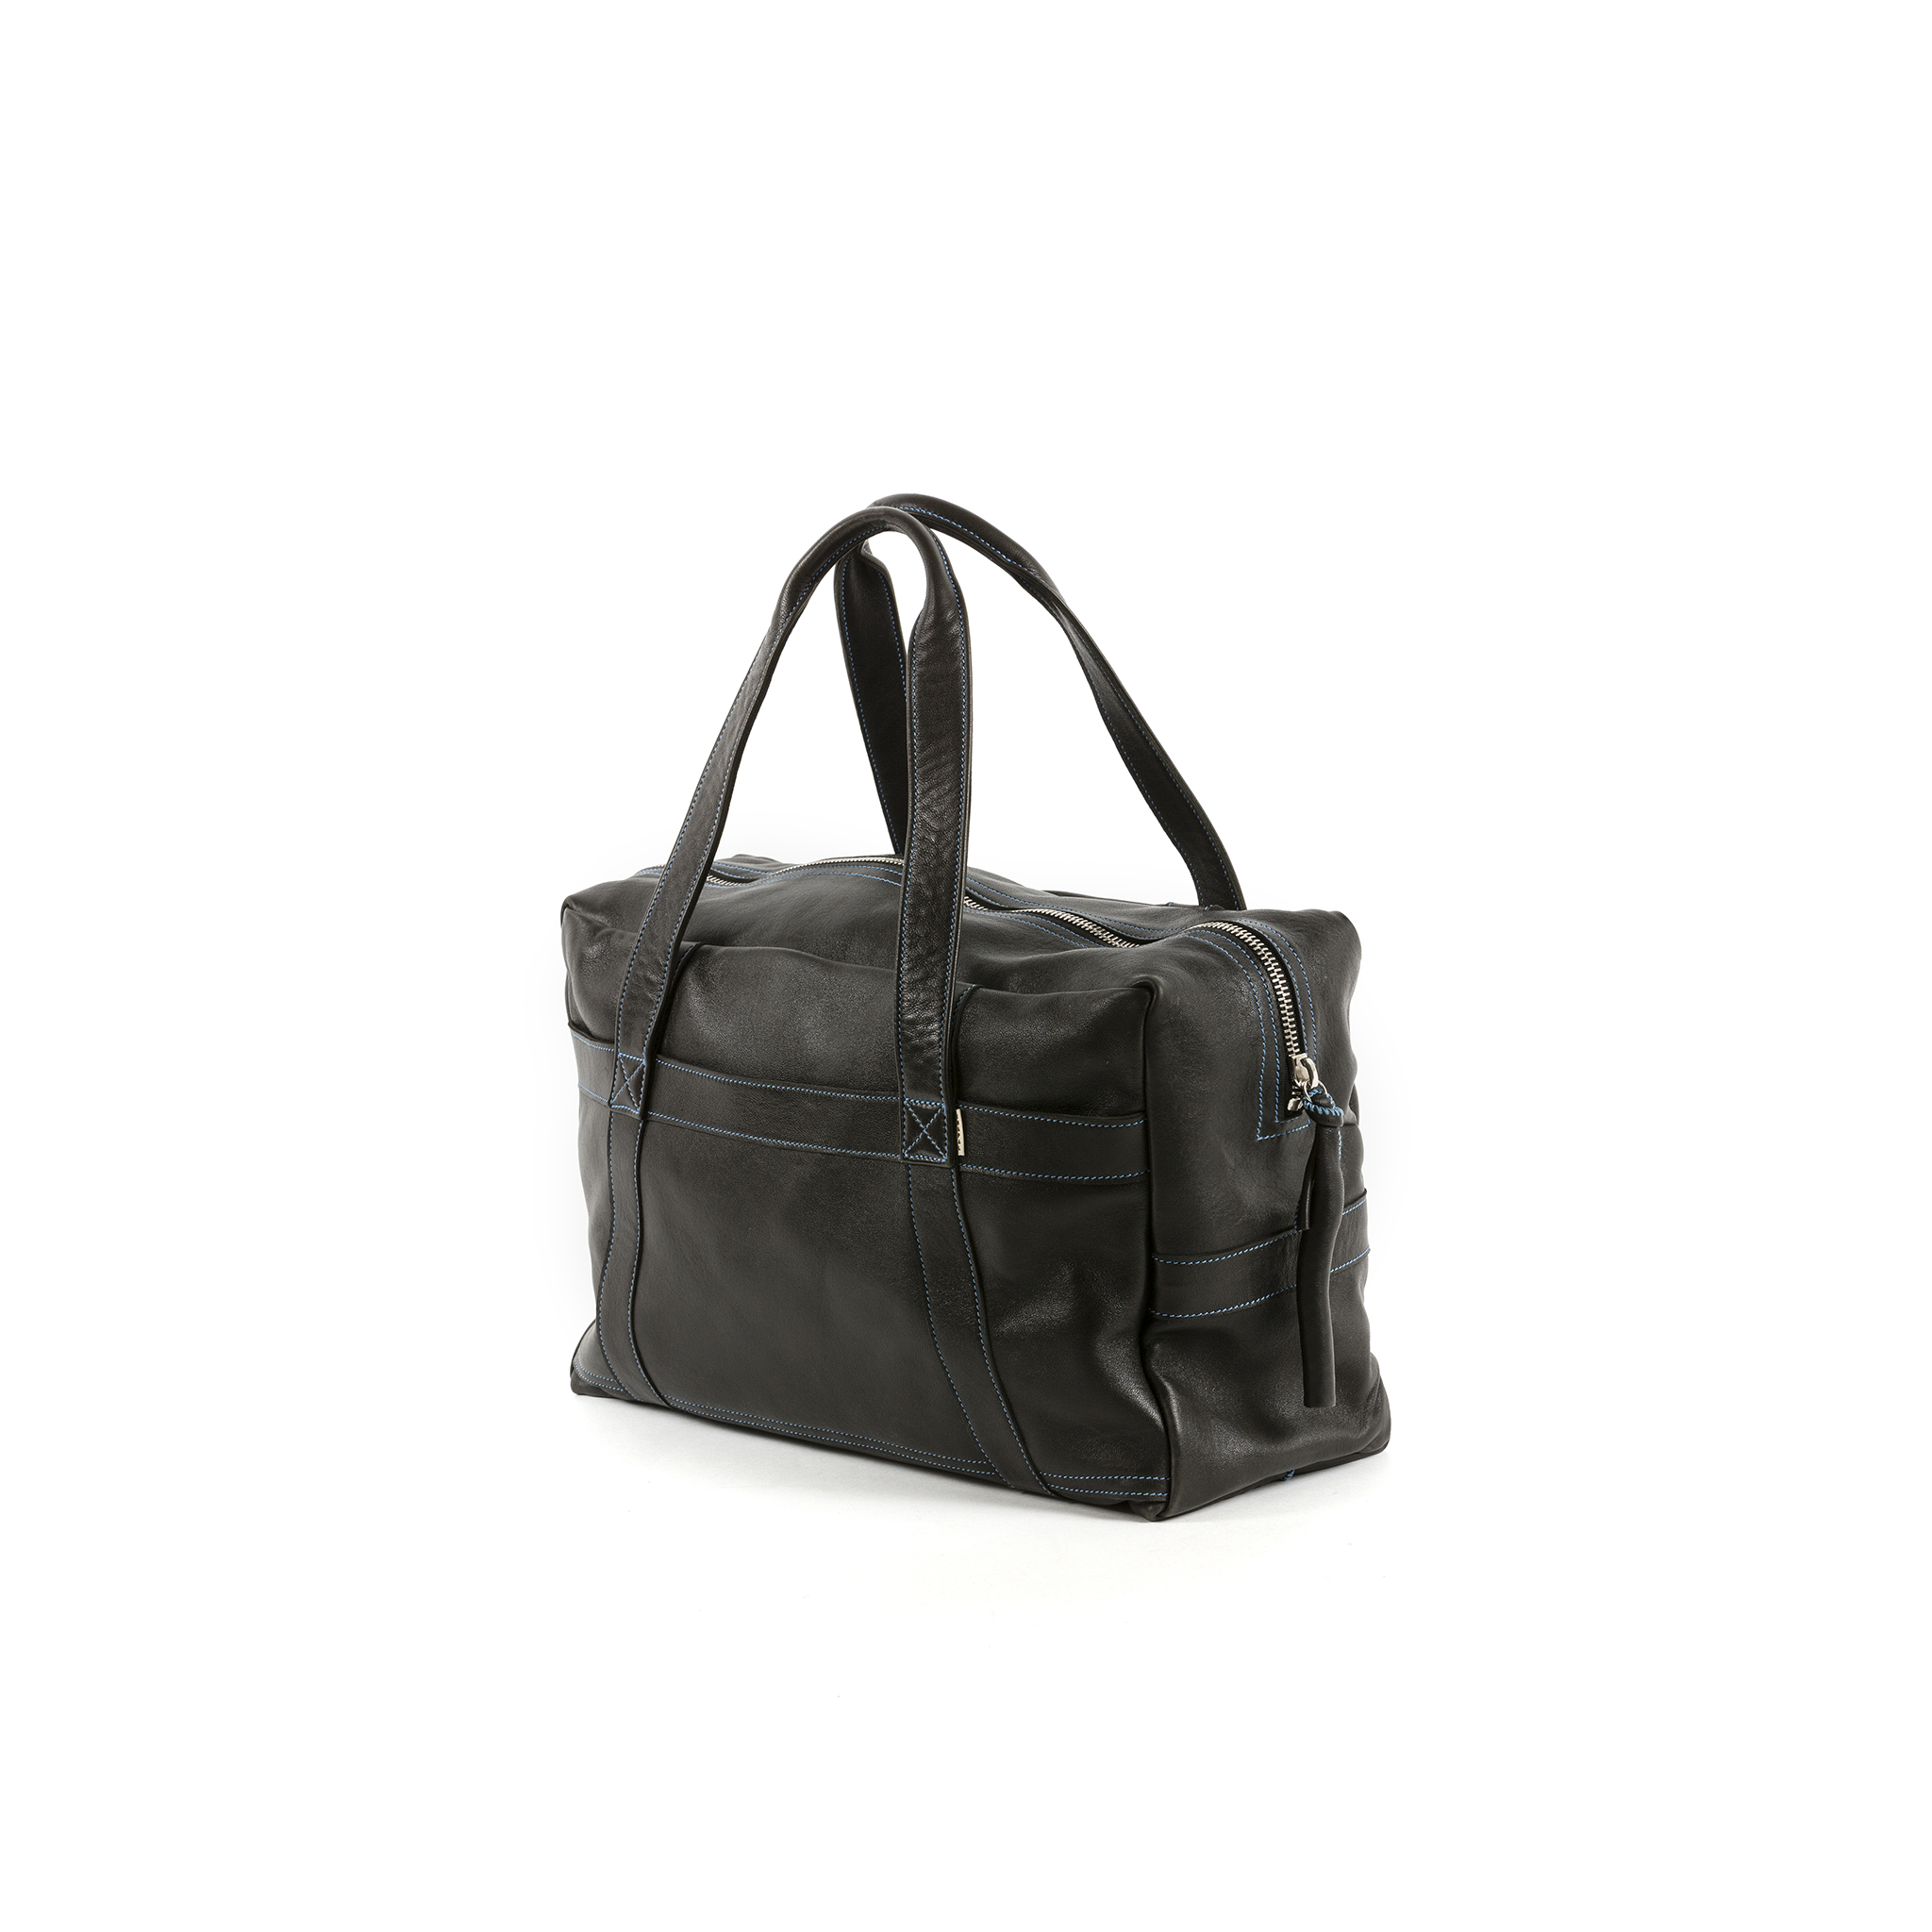 Small Soft Bag - Glossy leather - Black color